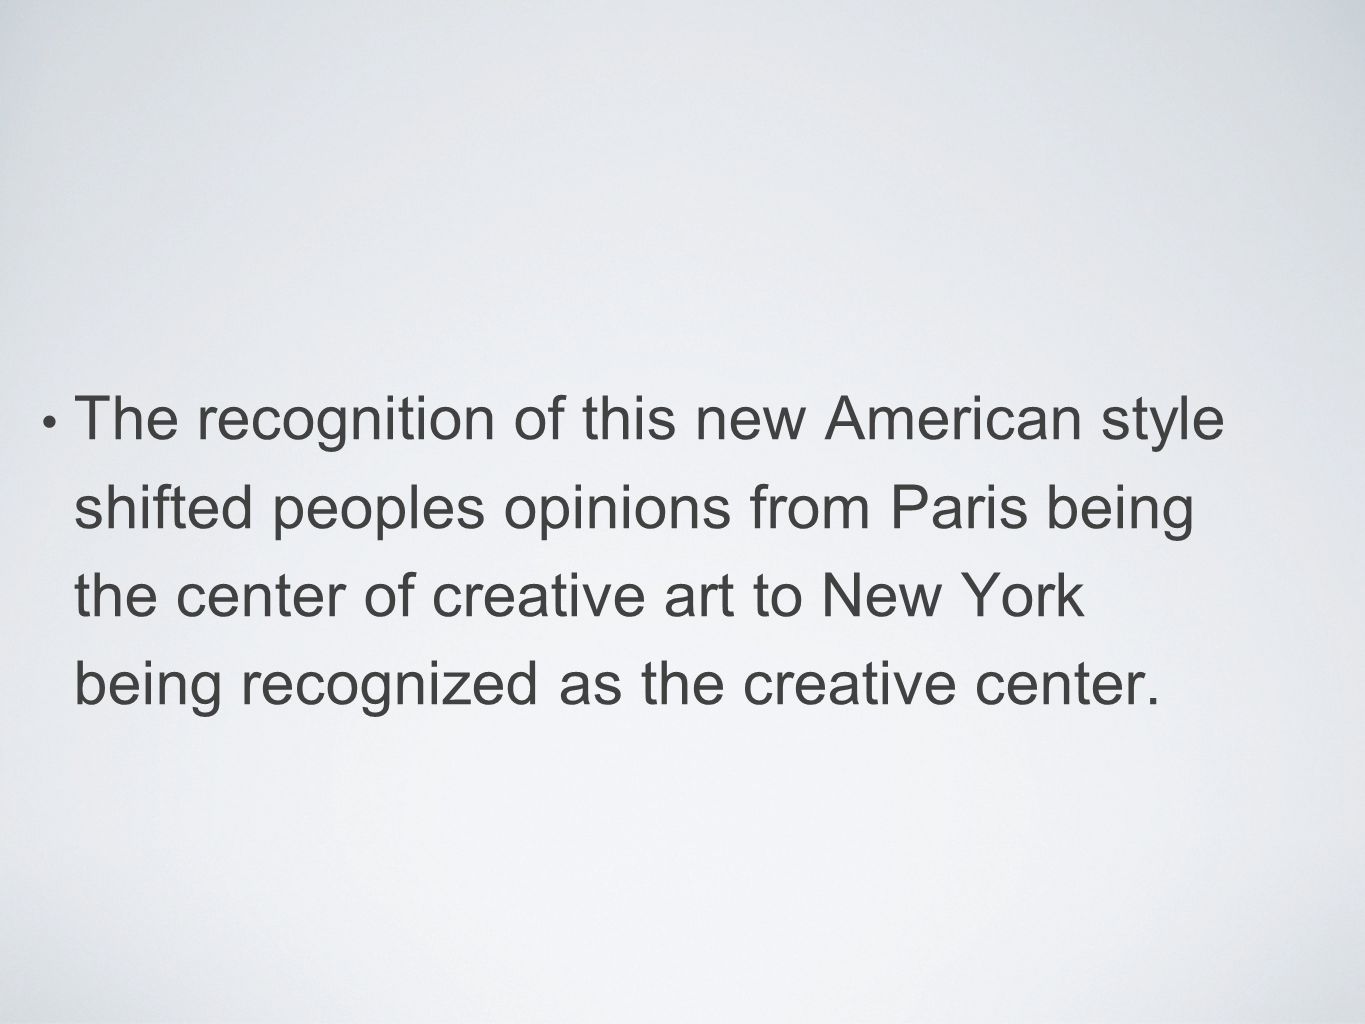 The recognition of this new American style shifted peoples opinions from Paris being the center of creative art to New York being recognized as the creative center.